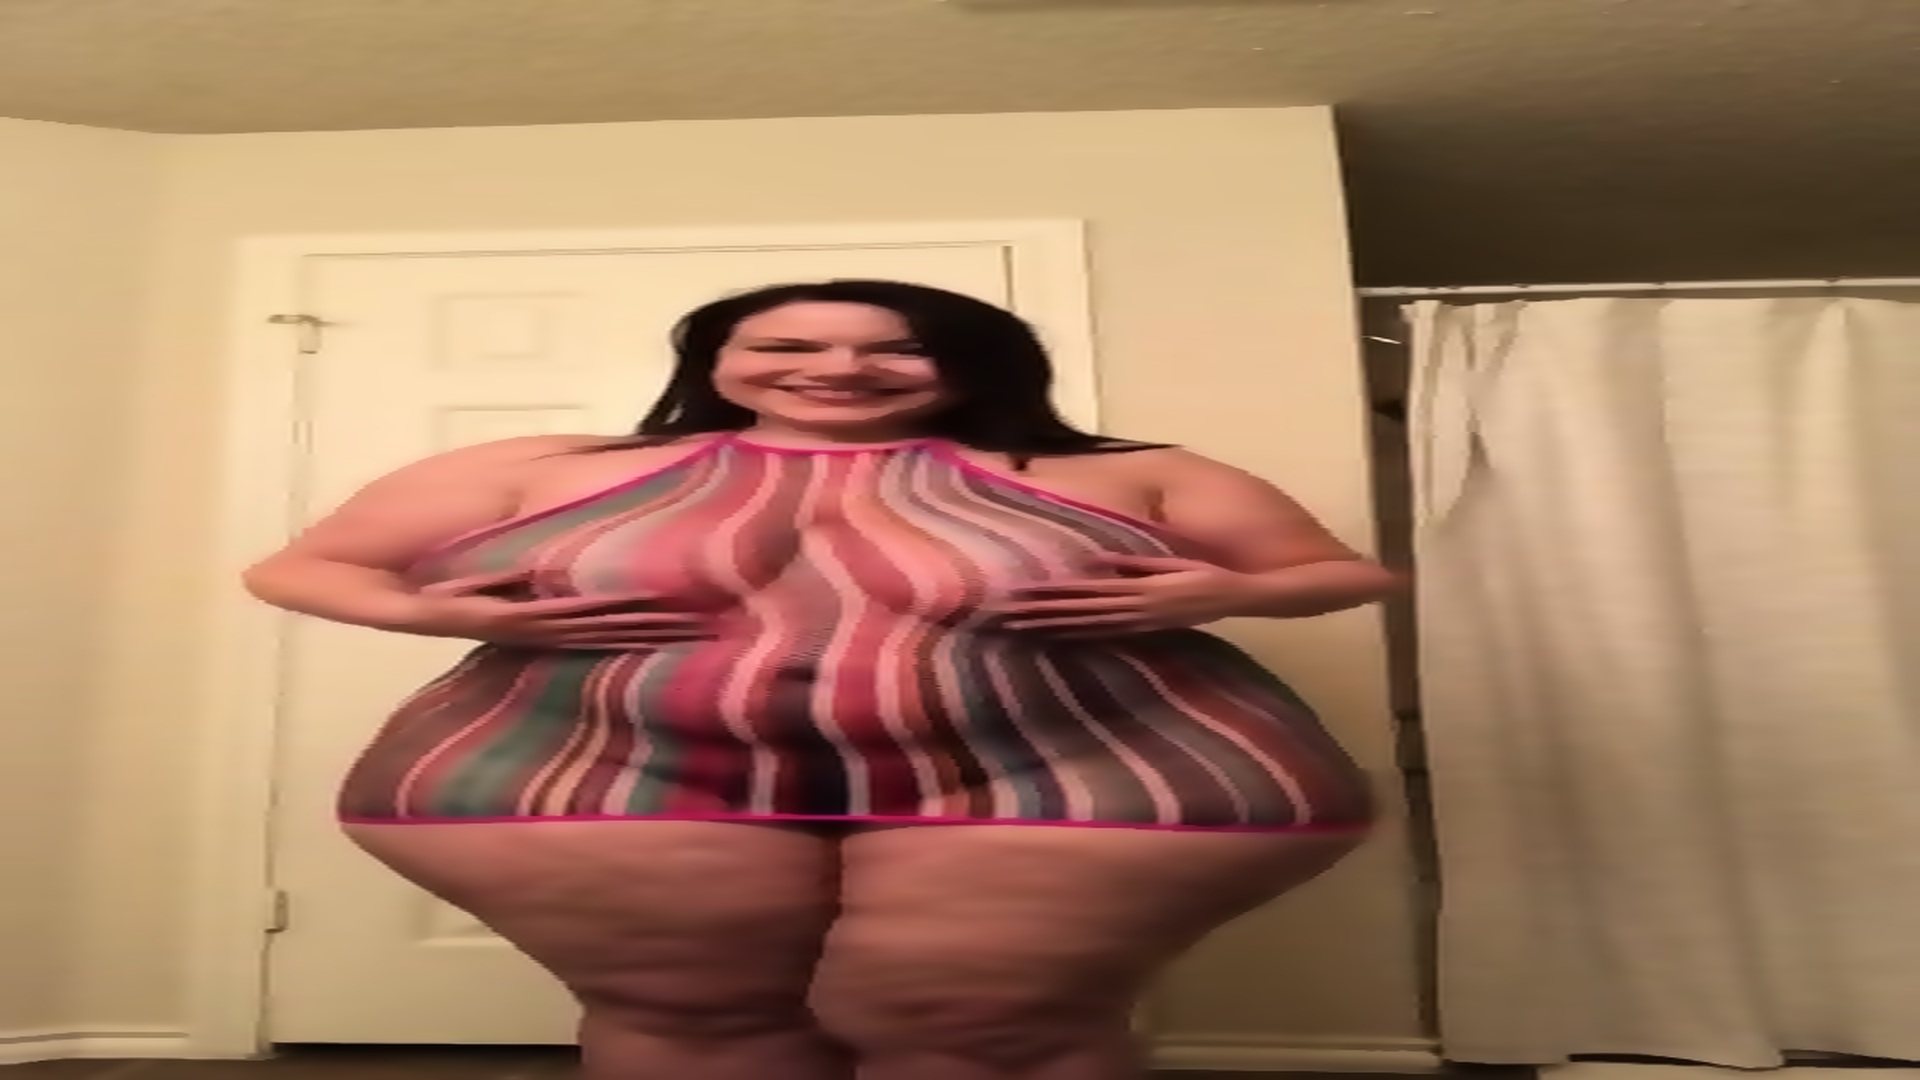 Thicc naked girl